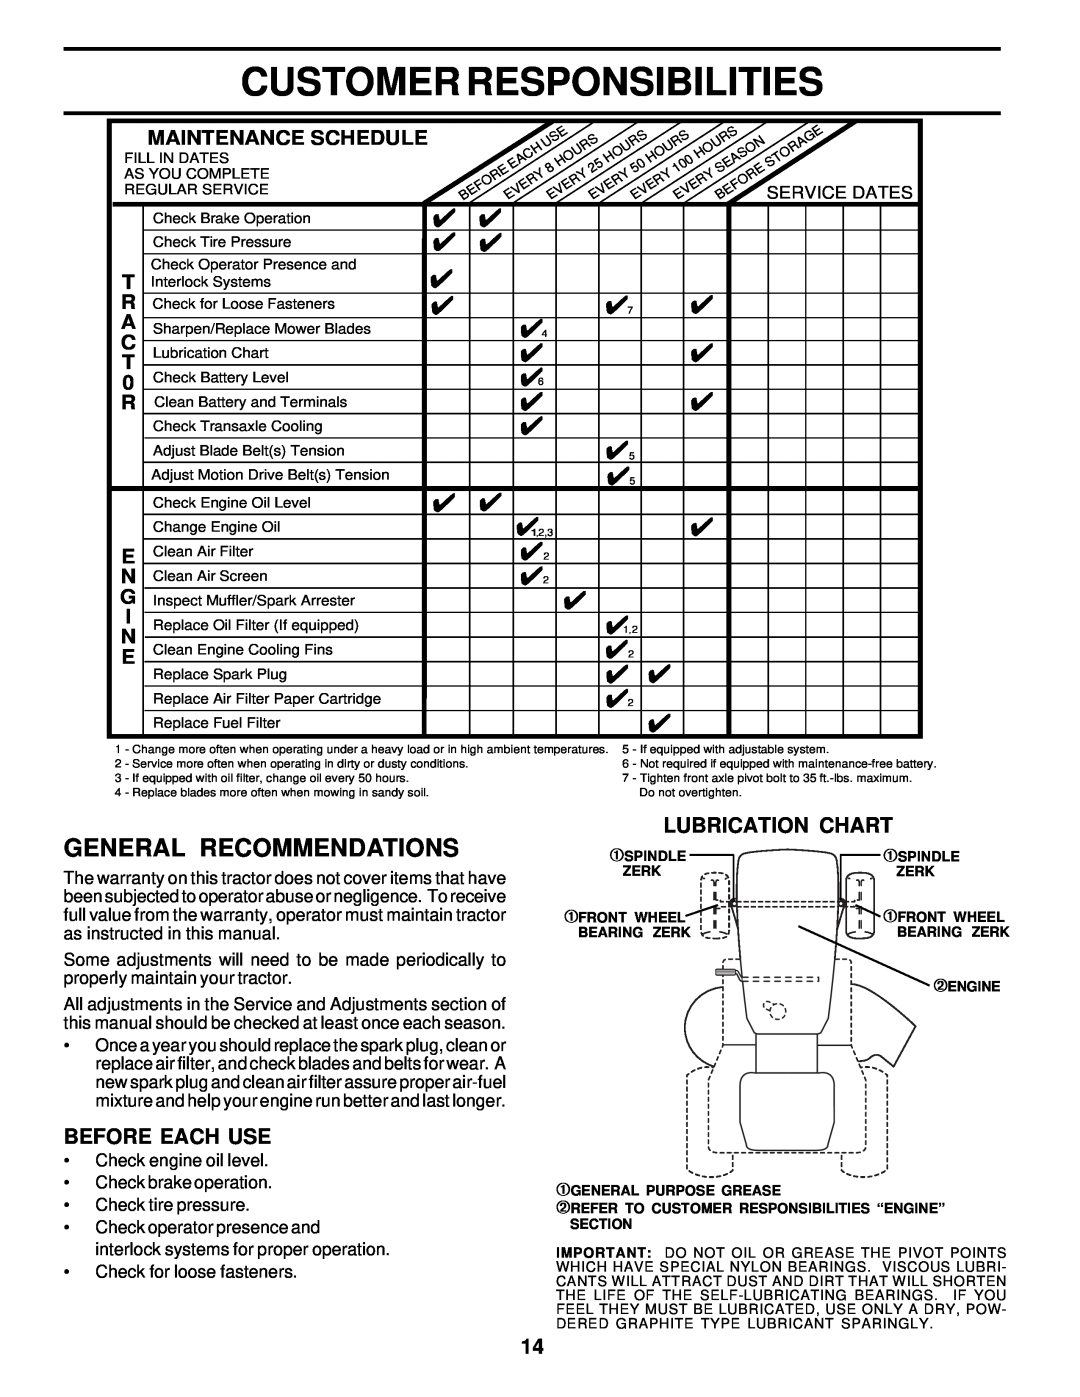 Weed Eater 171883 manual Customer Responsibilities, General Recommendations, Before Each Use, ¿ Lubrication Chart 